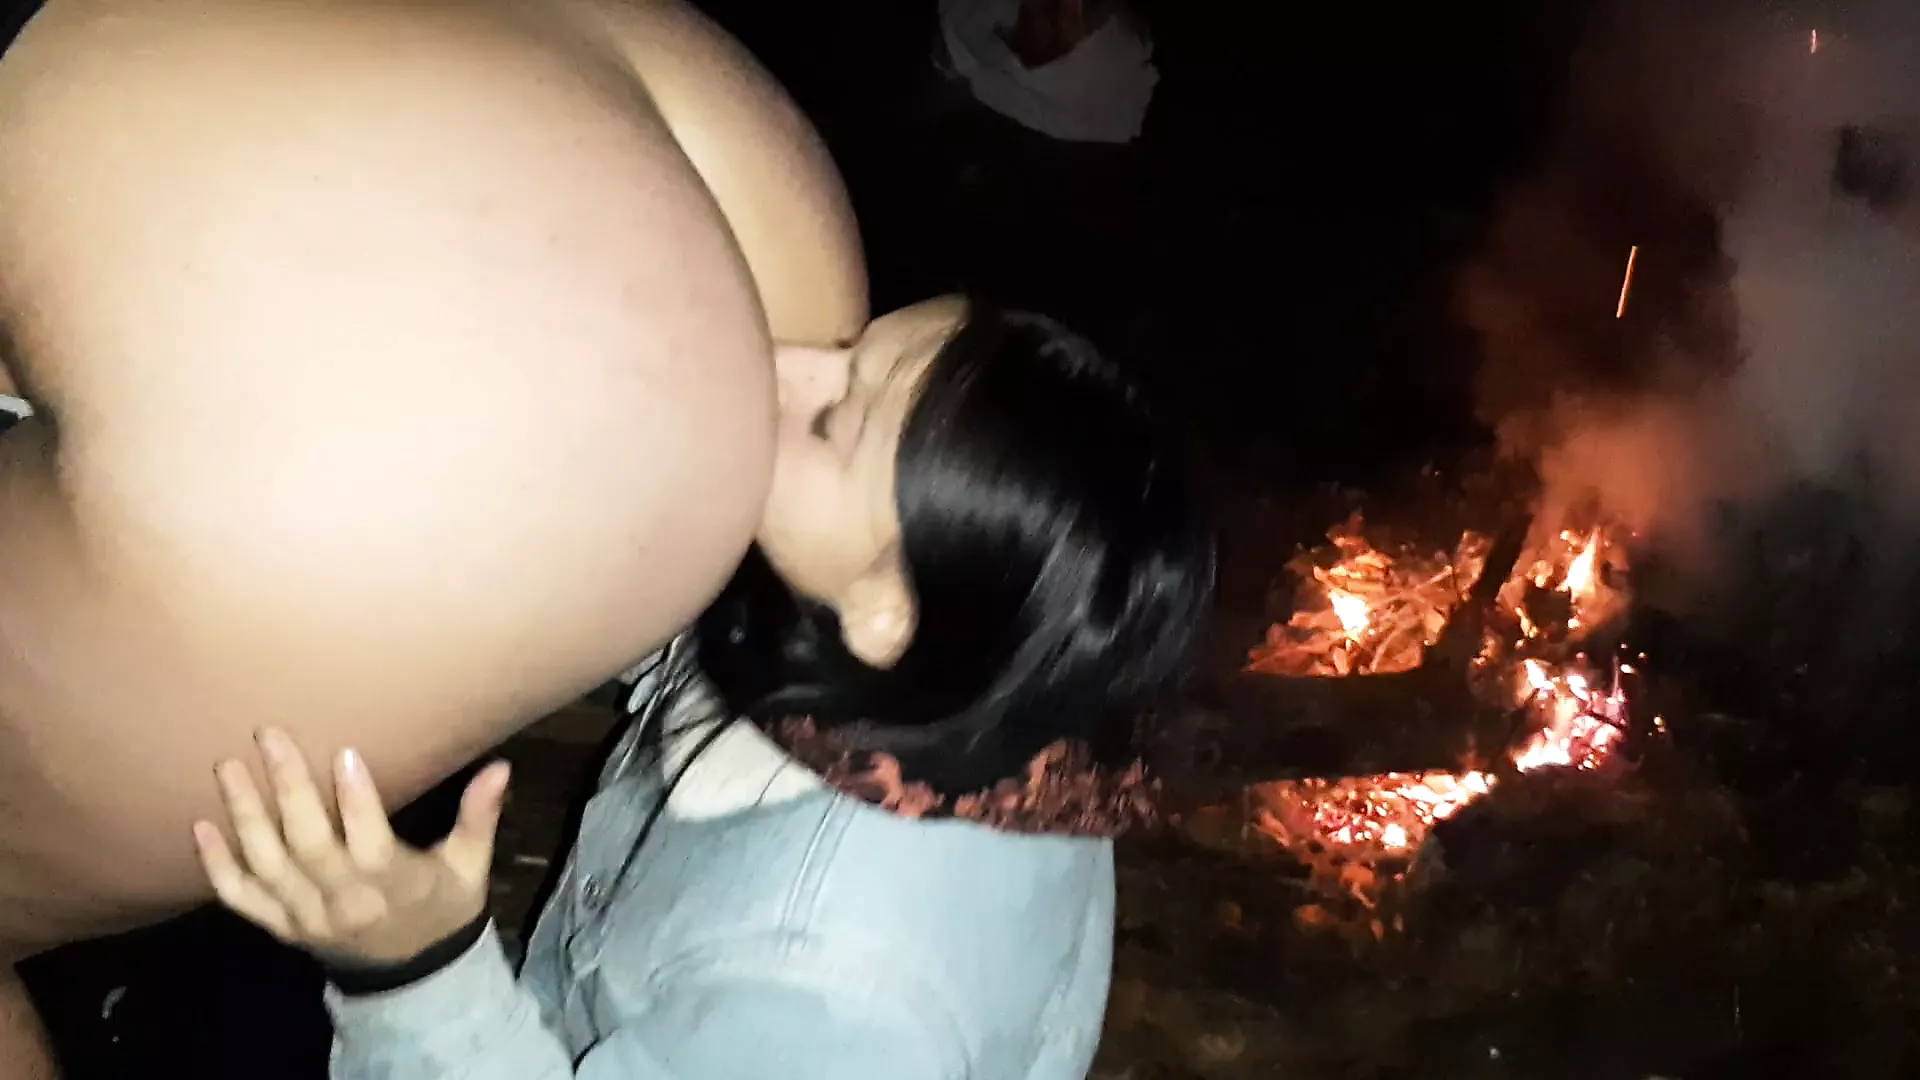 Licked my ass by the fire when friends quit smoking